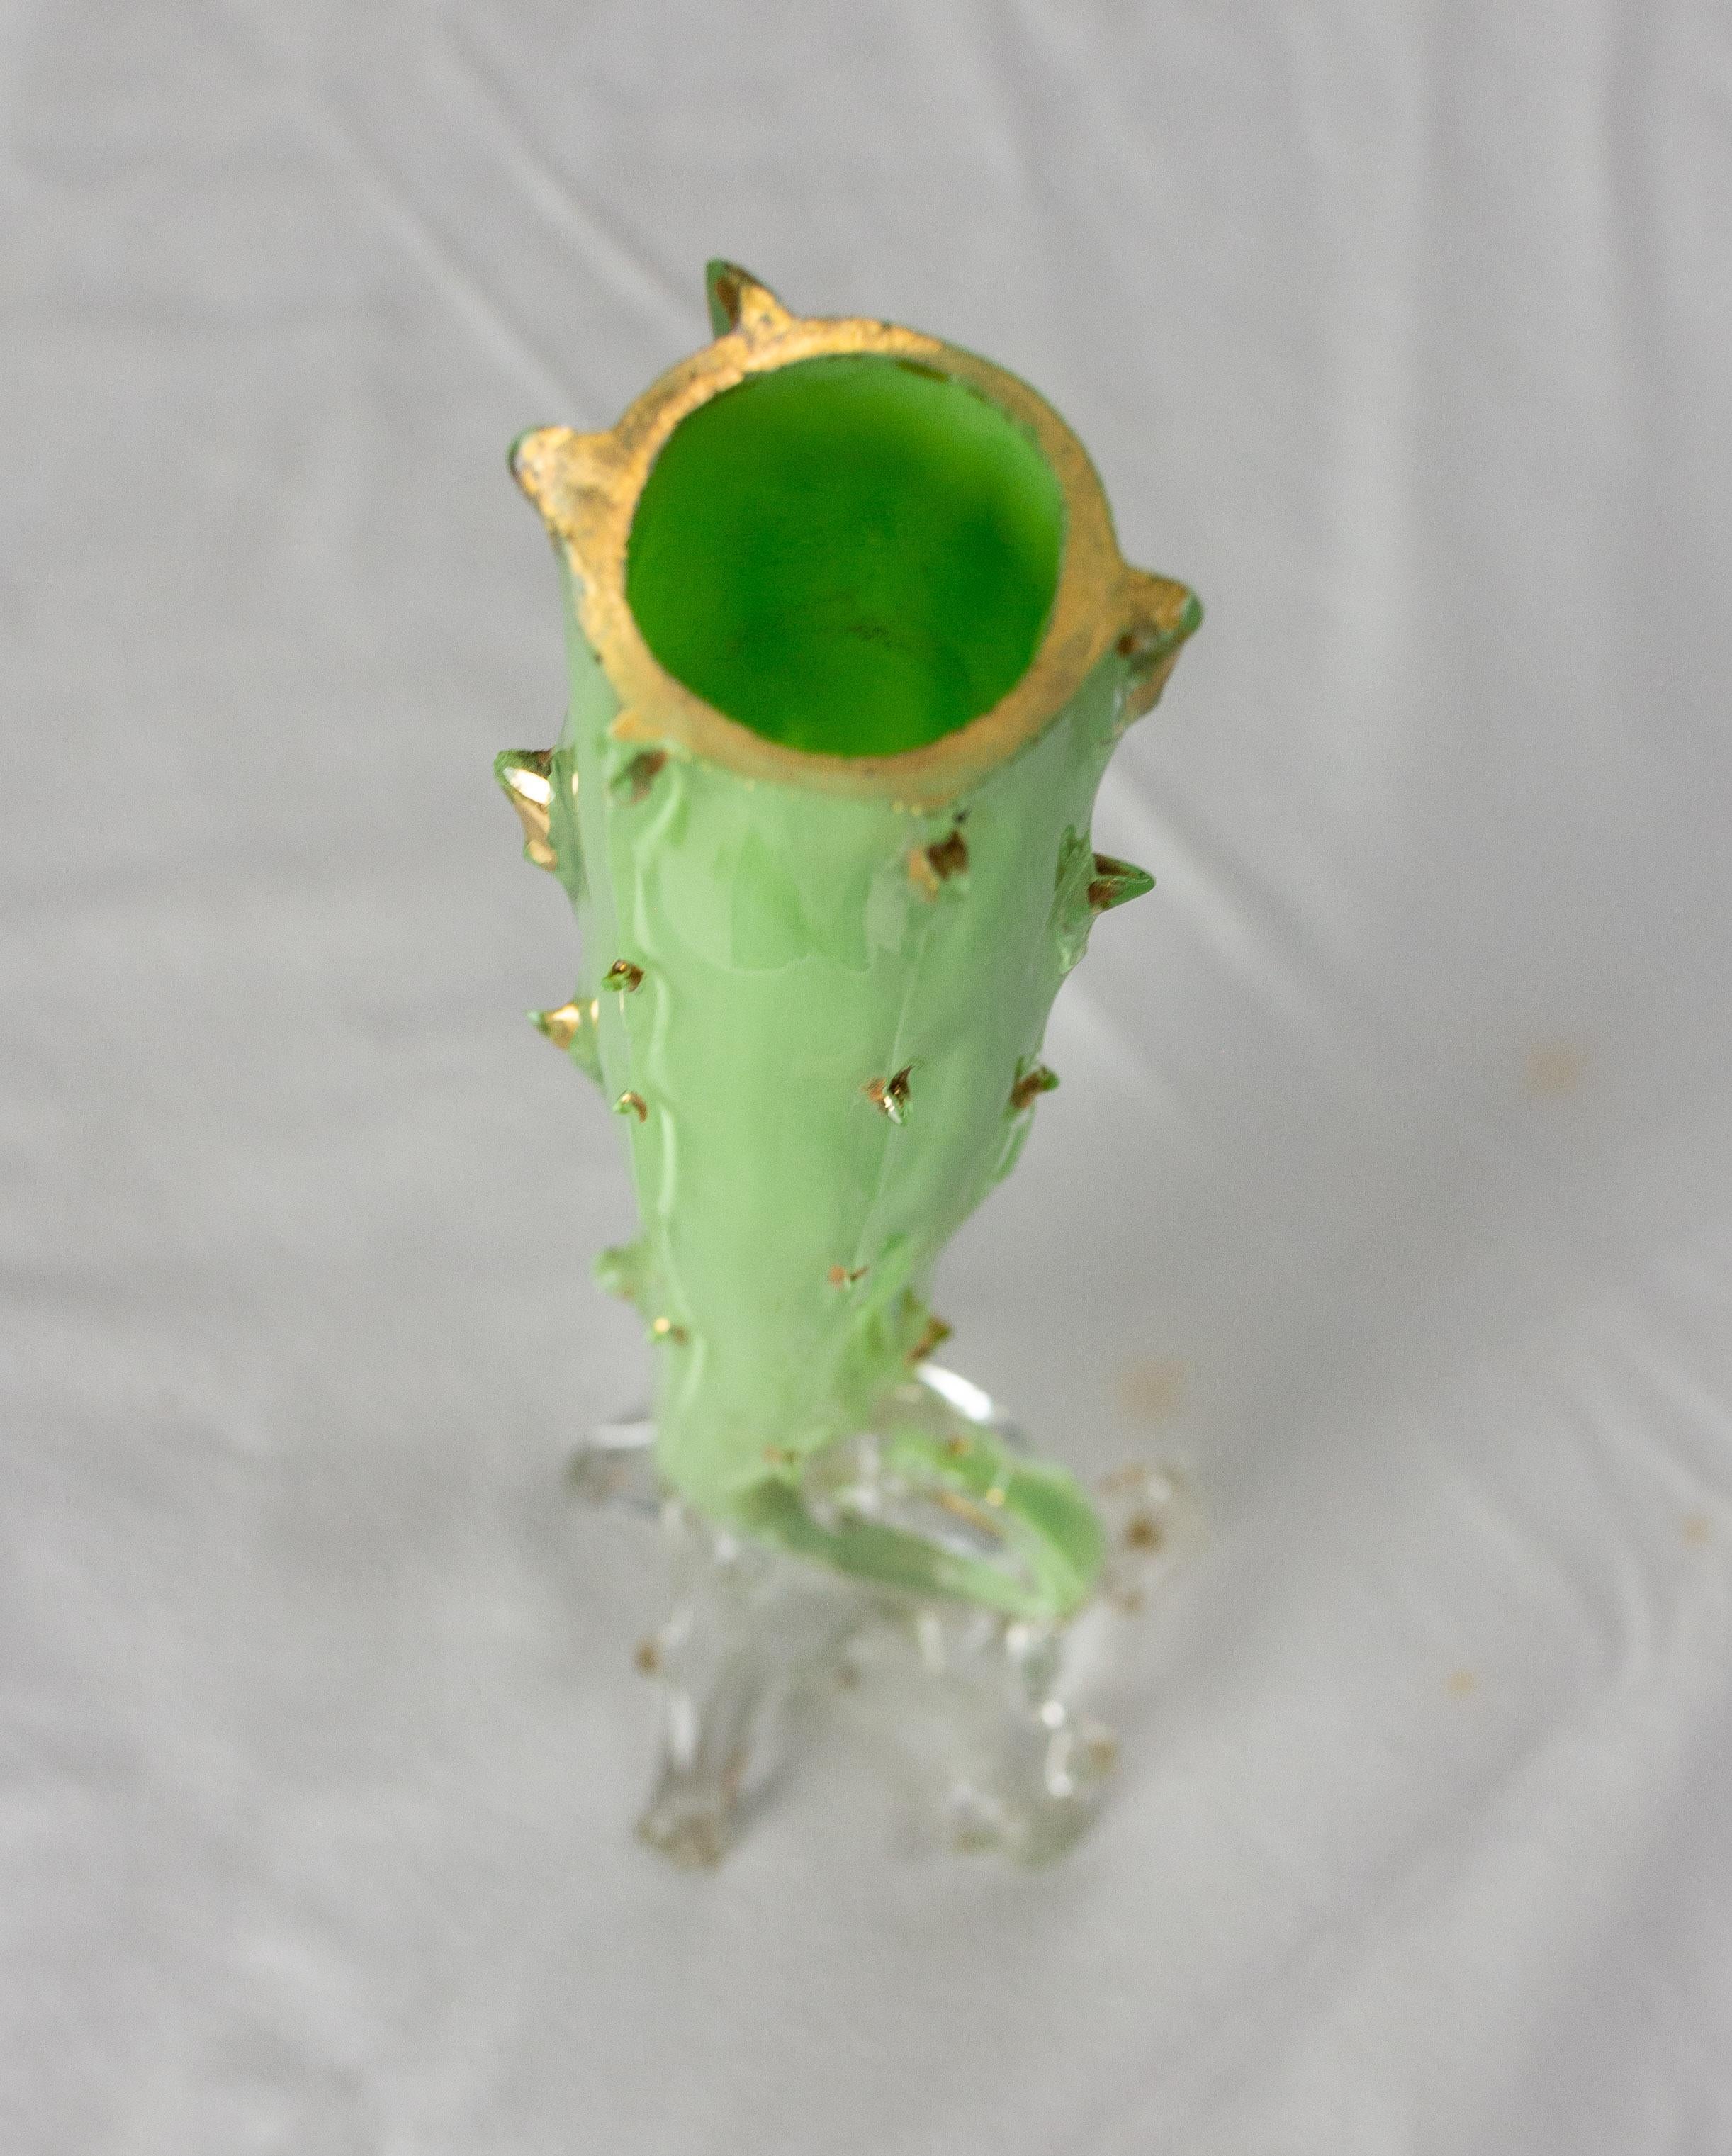 French Vase Soliflor Green and Golden Glass, Imitation of a Rose Stem, C. 1960 For Sale 1